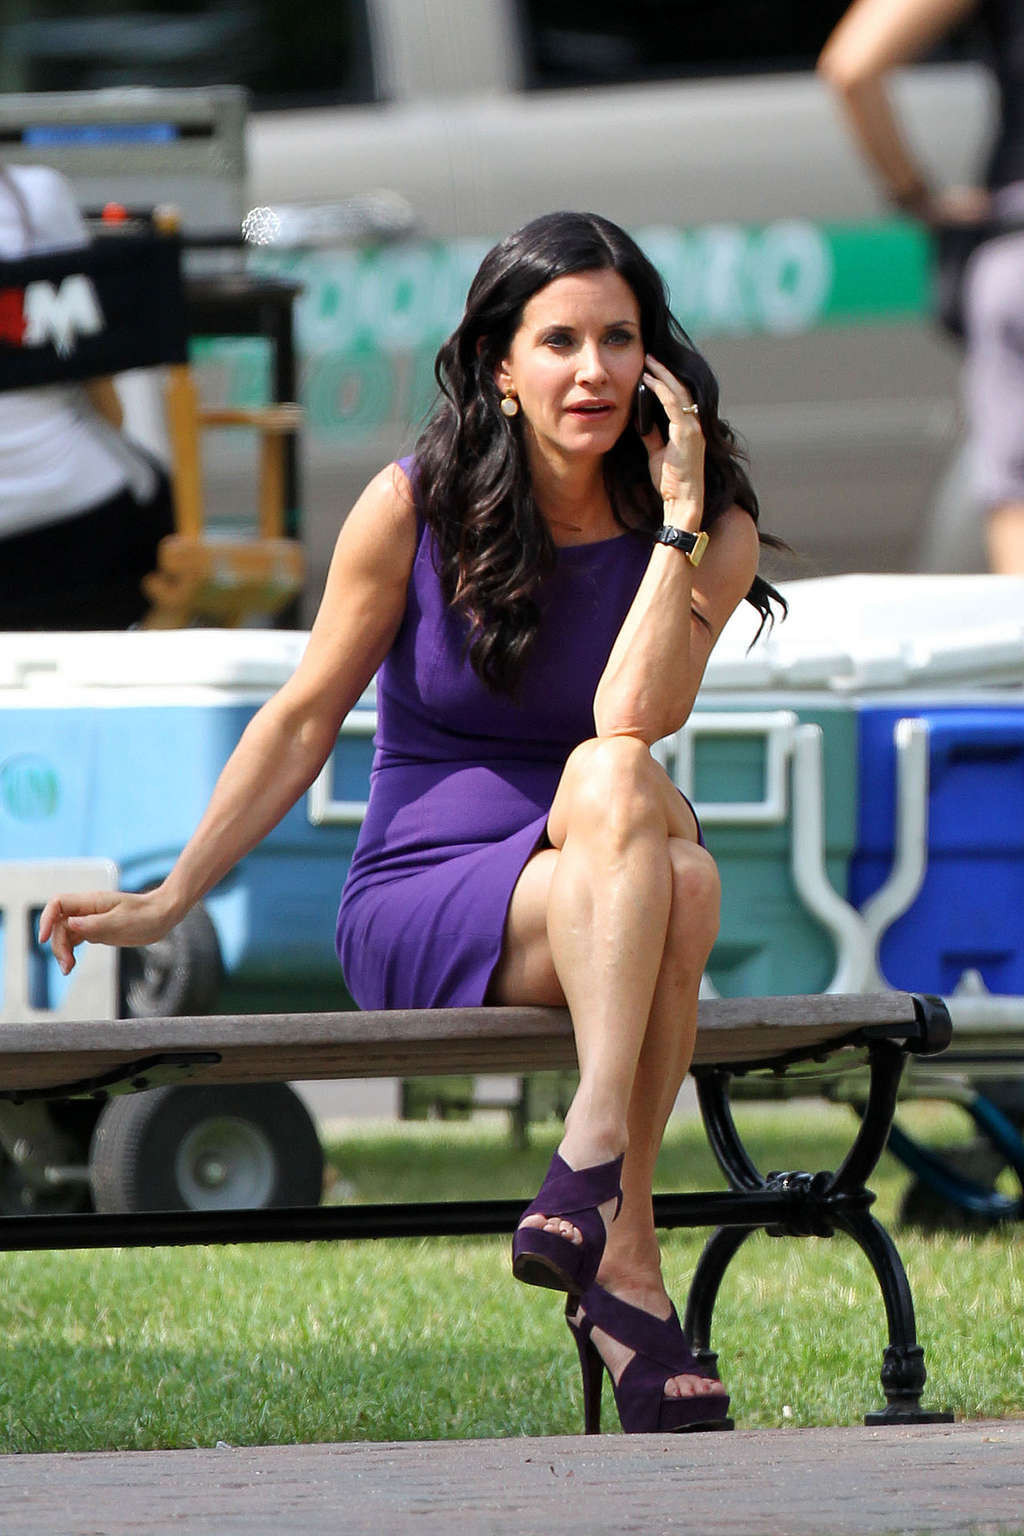 Courteney Cox flashing her panties and show great body in tight dress #75339431